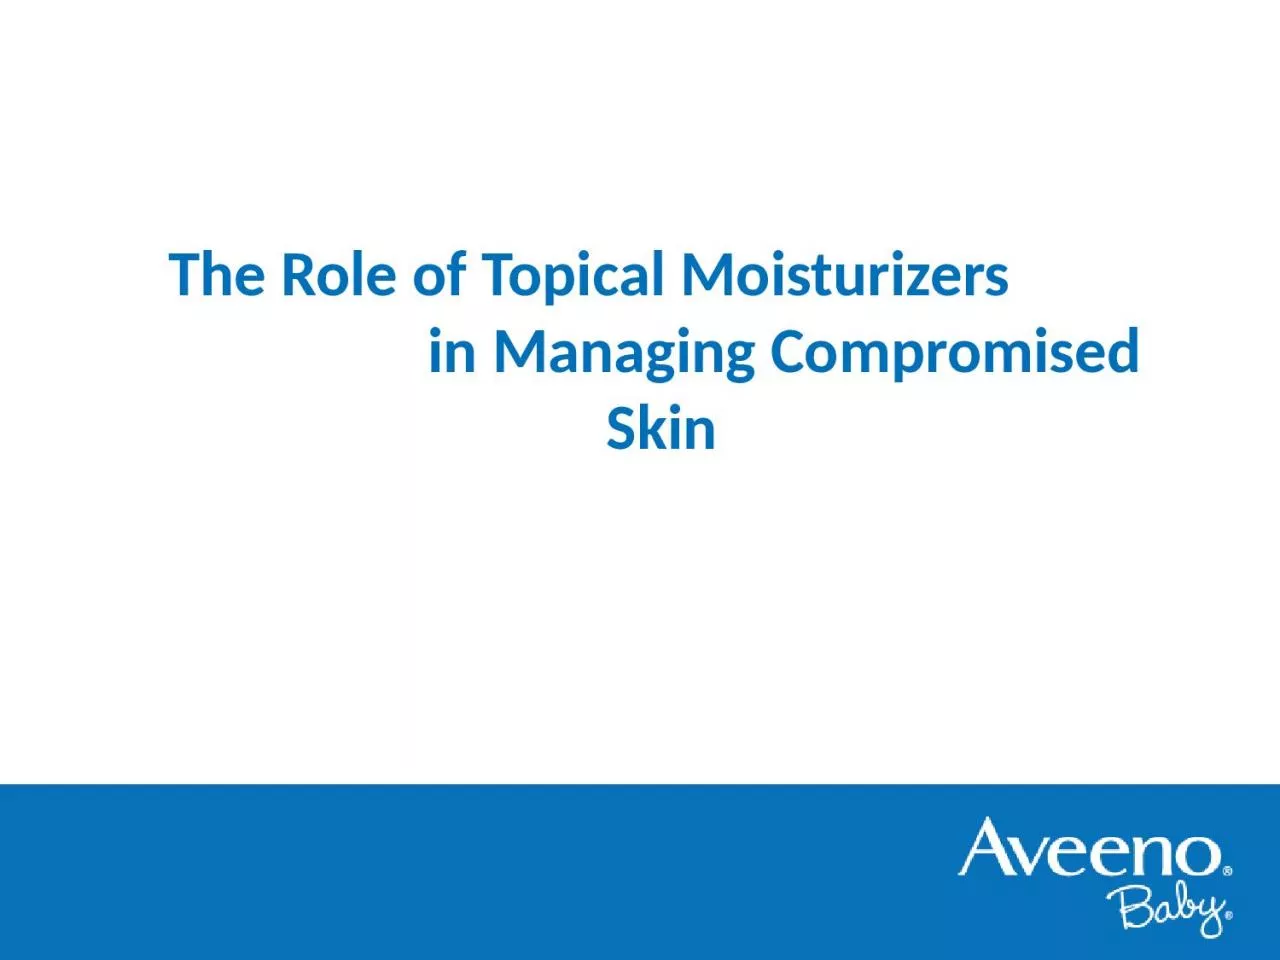 The Role of Topical Moisturizers                            in Managing Compromised Skin